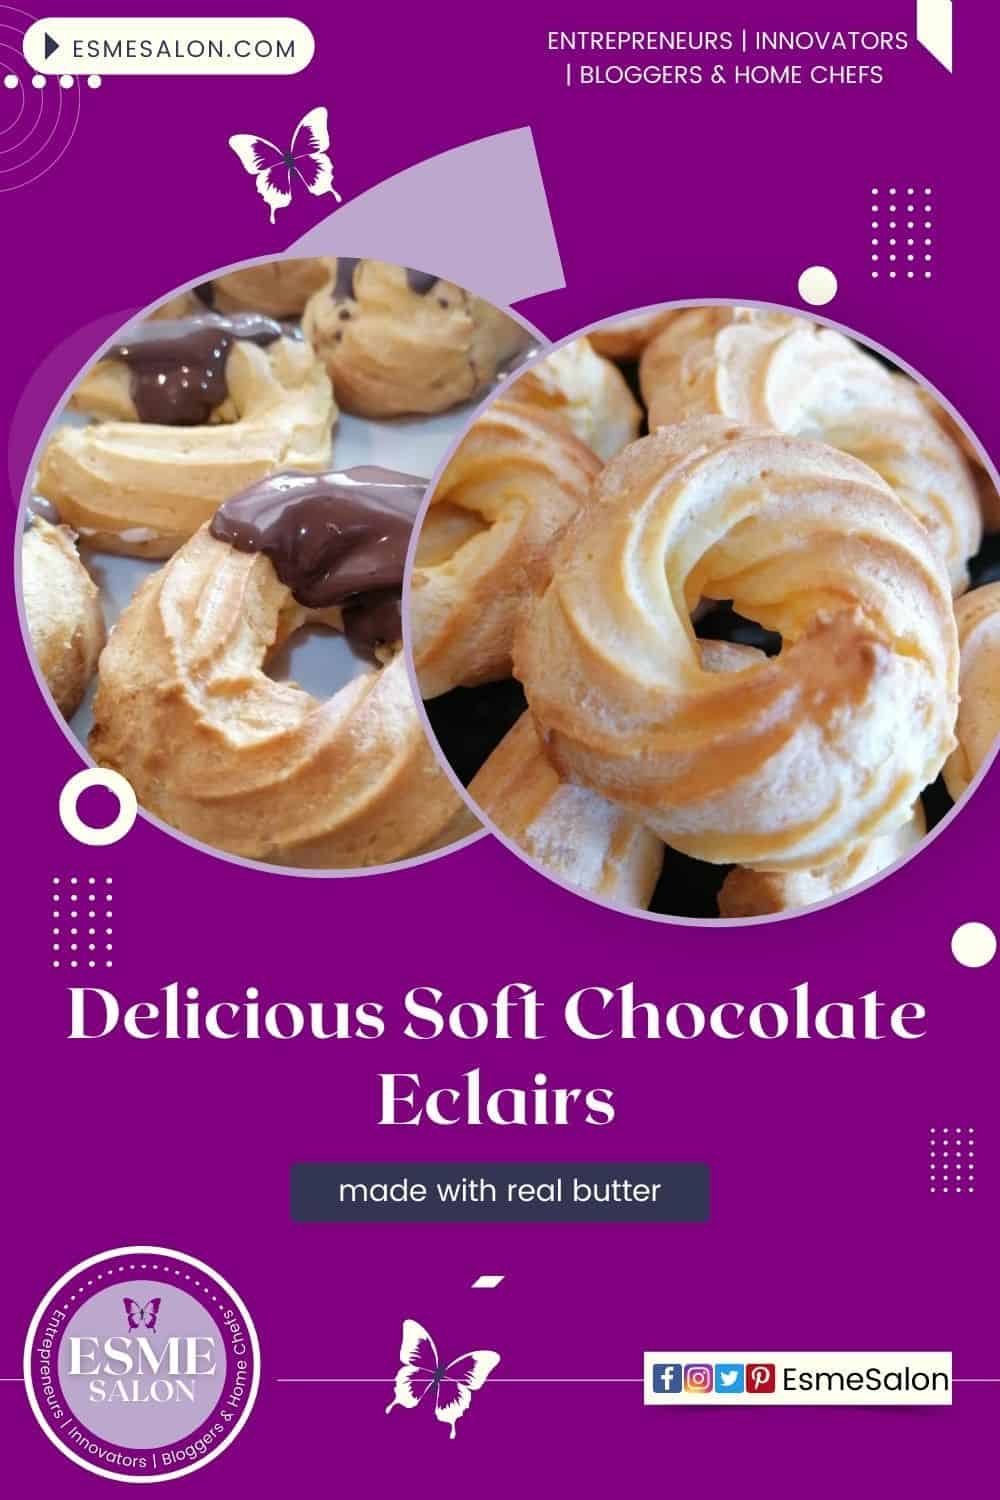 An image of Delicious Soft Chocolate Eclairs some dipped in chocolate and others just plain